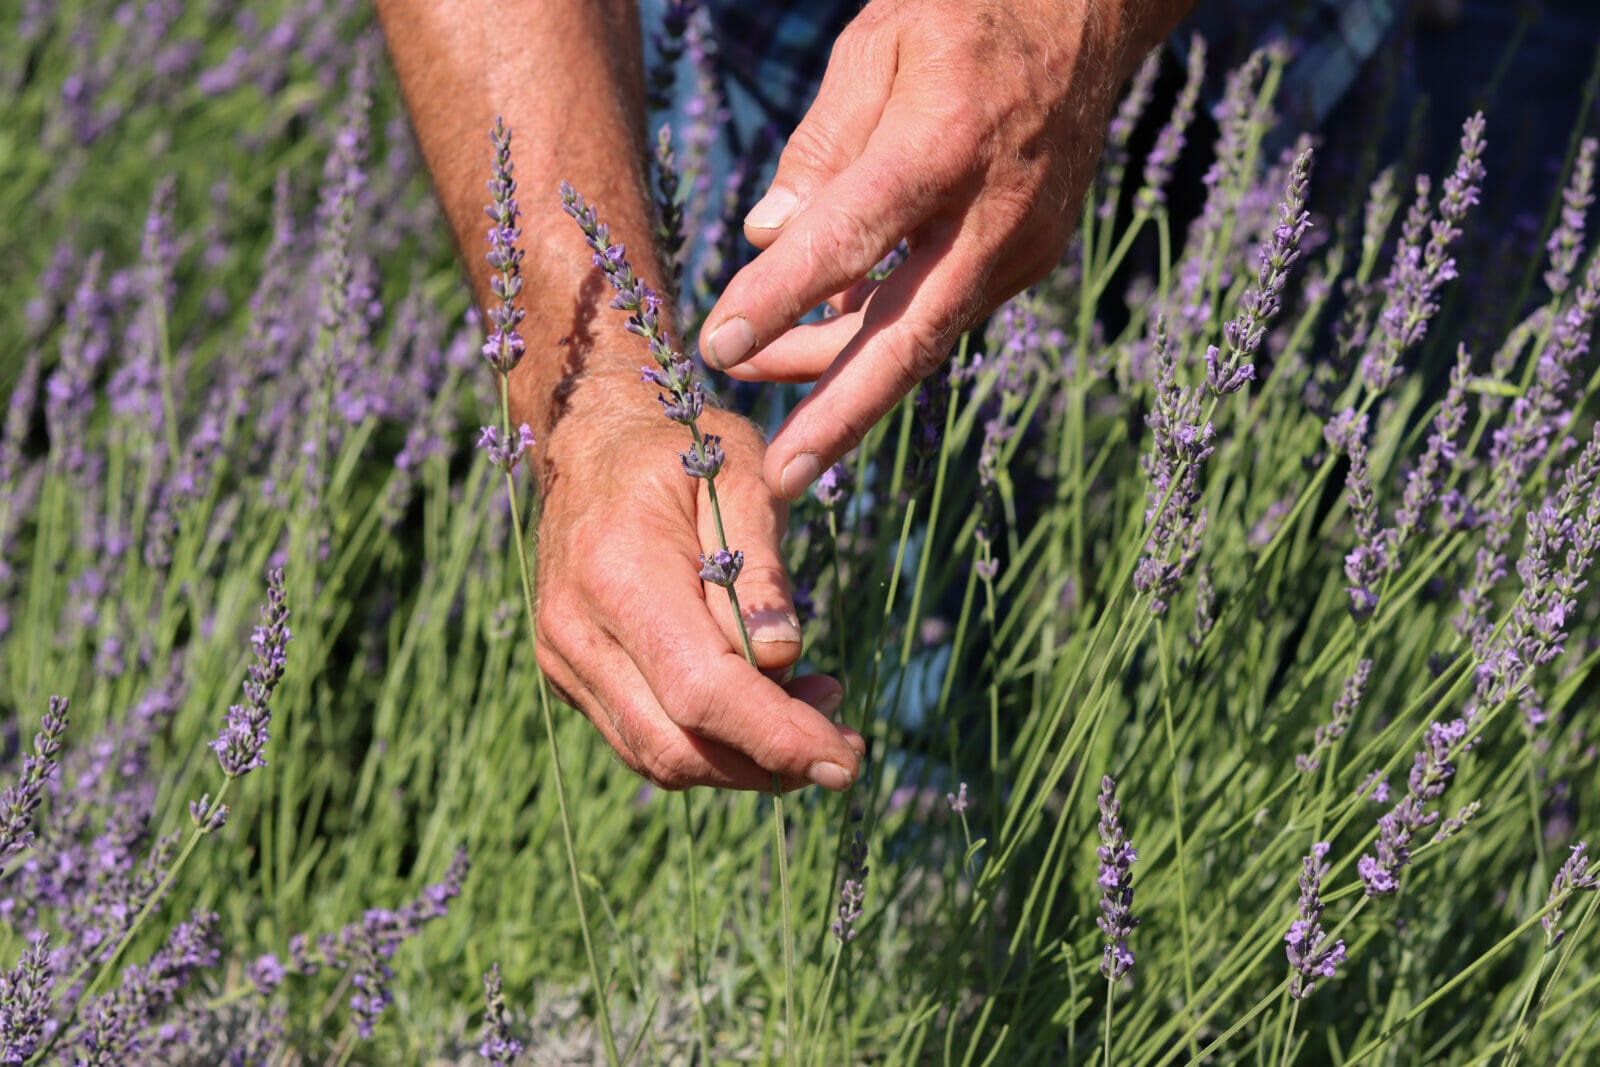 a pair of hands holds a stalk of lavender and gestures to the buds which are just beginning to open up.